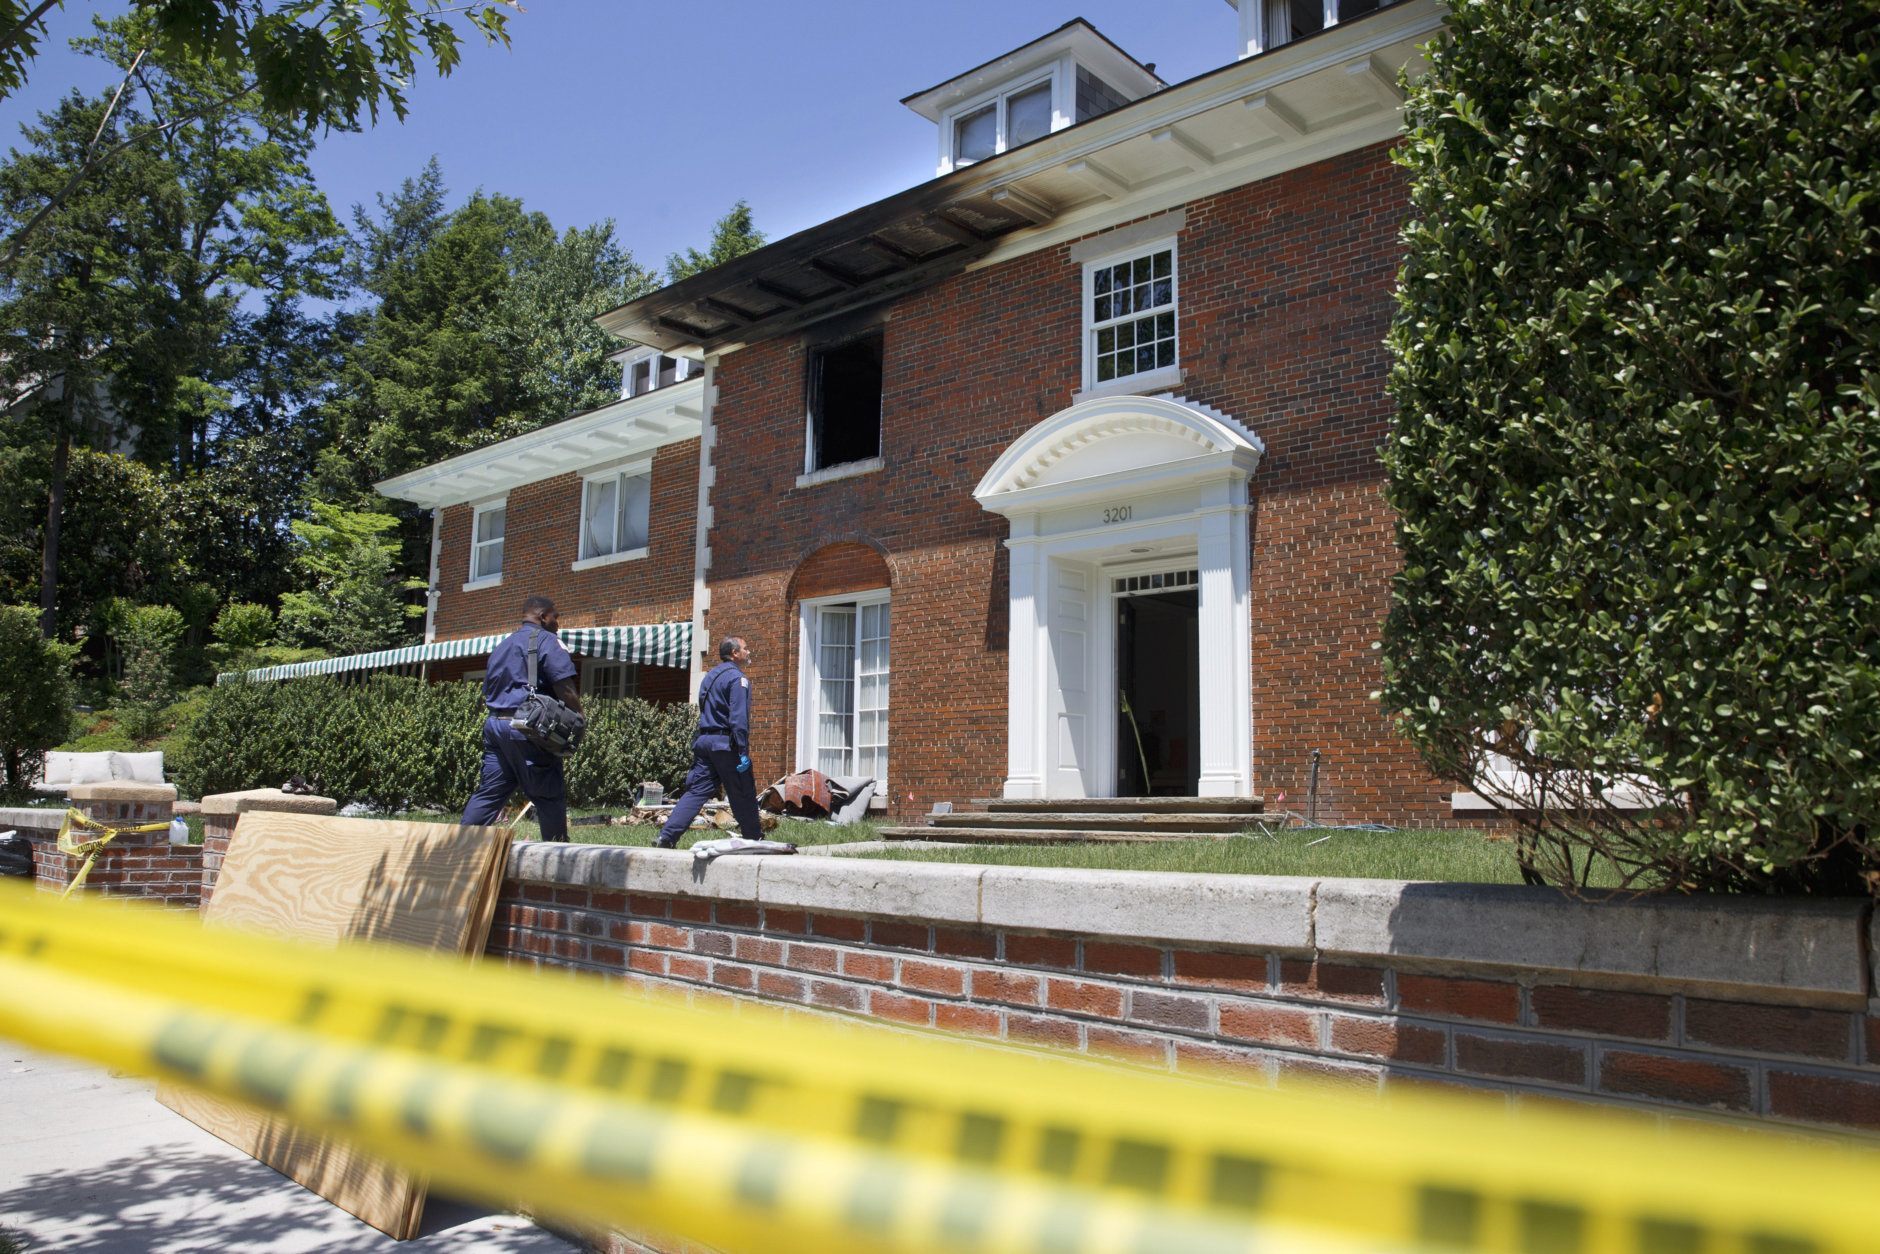 FILE - In this May 22, 2015 file photo, police continue working at a fire-damaged multimillion-dollar home in northwest Washington home where 46-year-old Savvas Savopoulos, his 47-year-old wife, Amy Savopoulos, the couple's 10-year-old son Philip, and housekeeper Veralicia Figueroa were found dead May 14. The mansion where three members of a wealthy Washington family and their housekeeper were slain is on the market. The 5-bedroom manor-style home with a 2-car garage in upper northwest Washington was listed last week for $3.25 million. (AP Photo/Jacquelyn Martin, File)